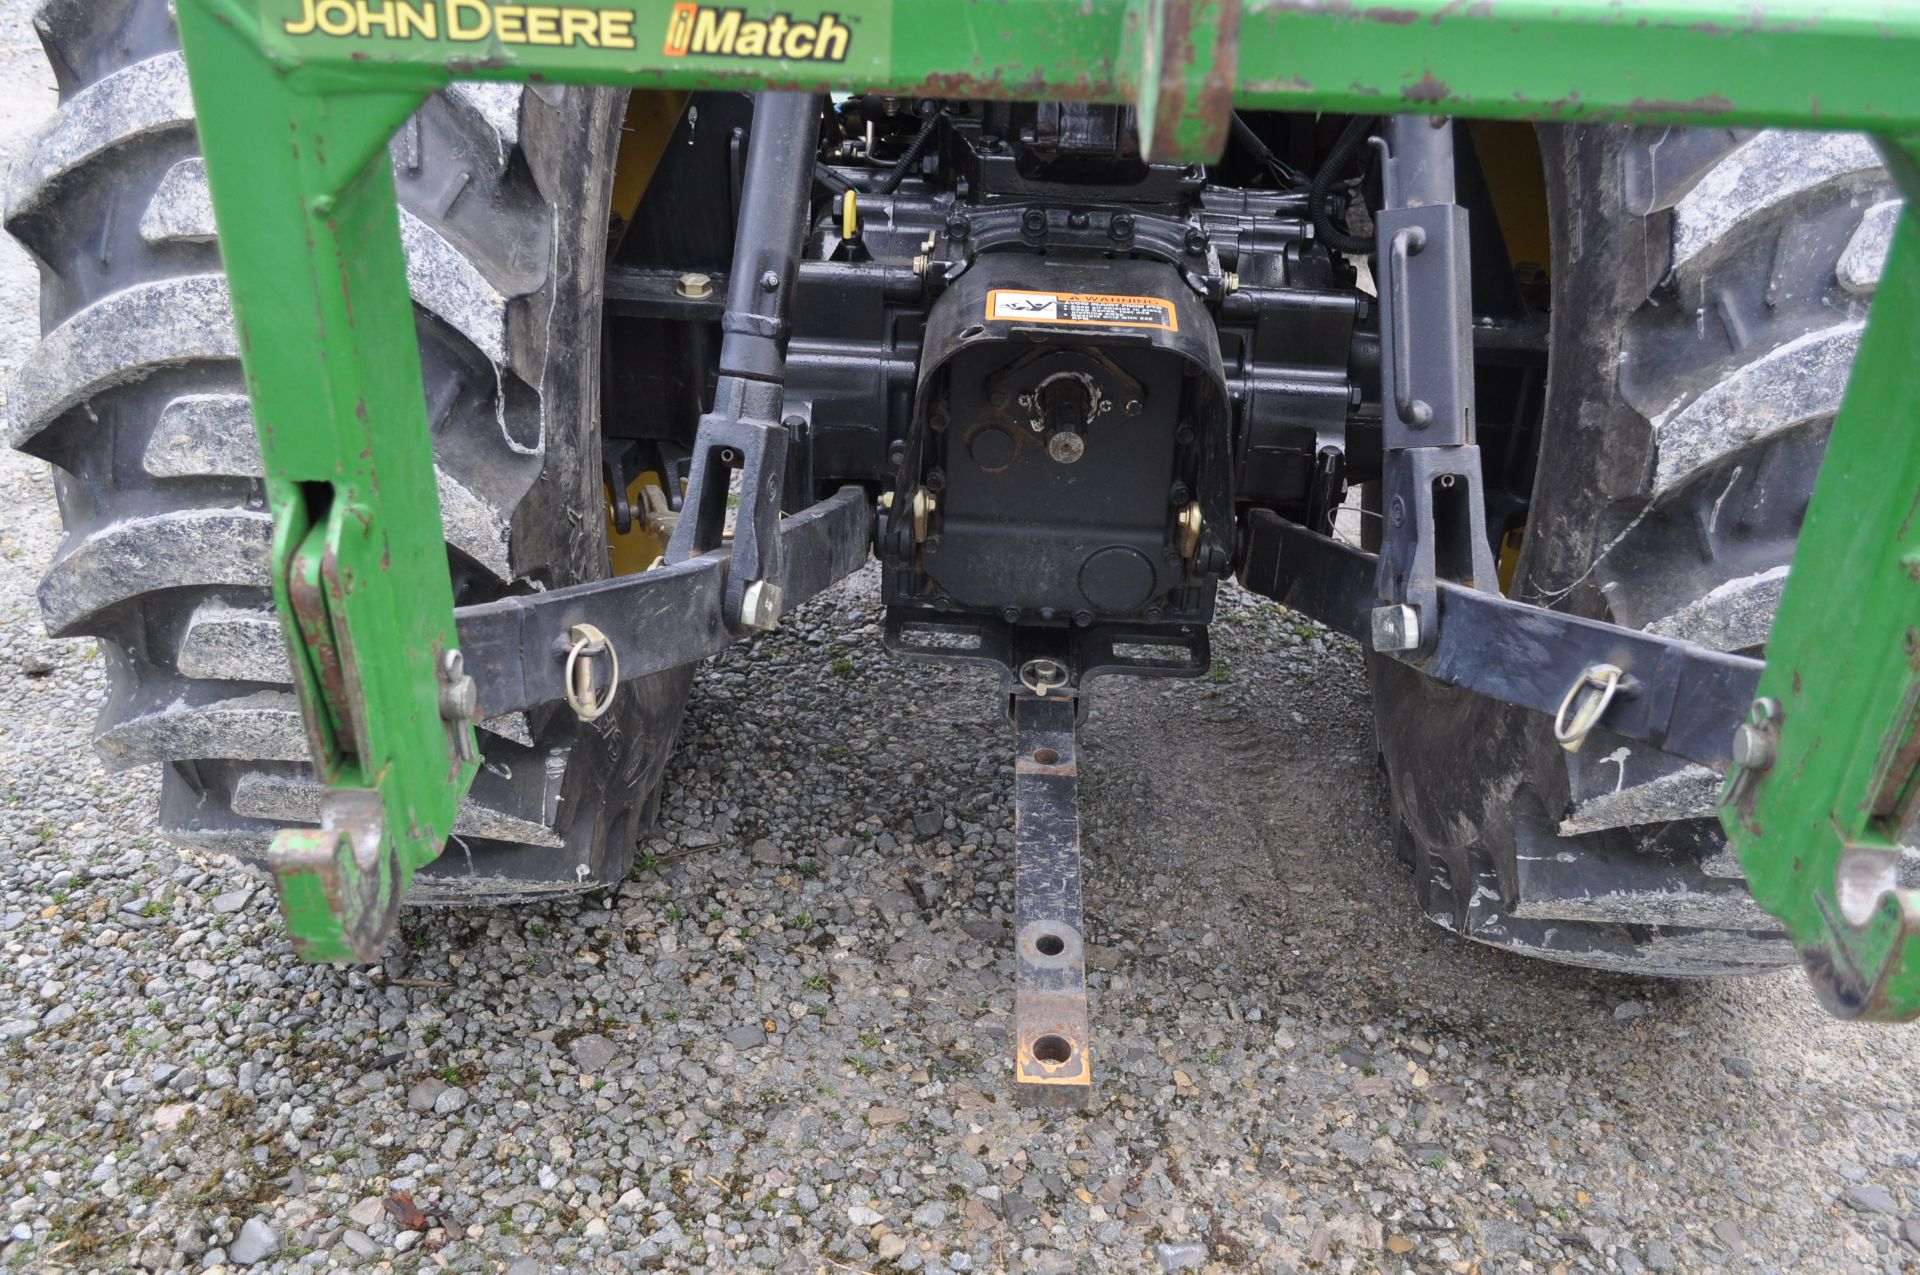 John Deere 3203 compact tractor, 15-19.5 rear, 25 x 8.50-14 front, 4x4 front wts, mid mast hyd - Image 17 of 26